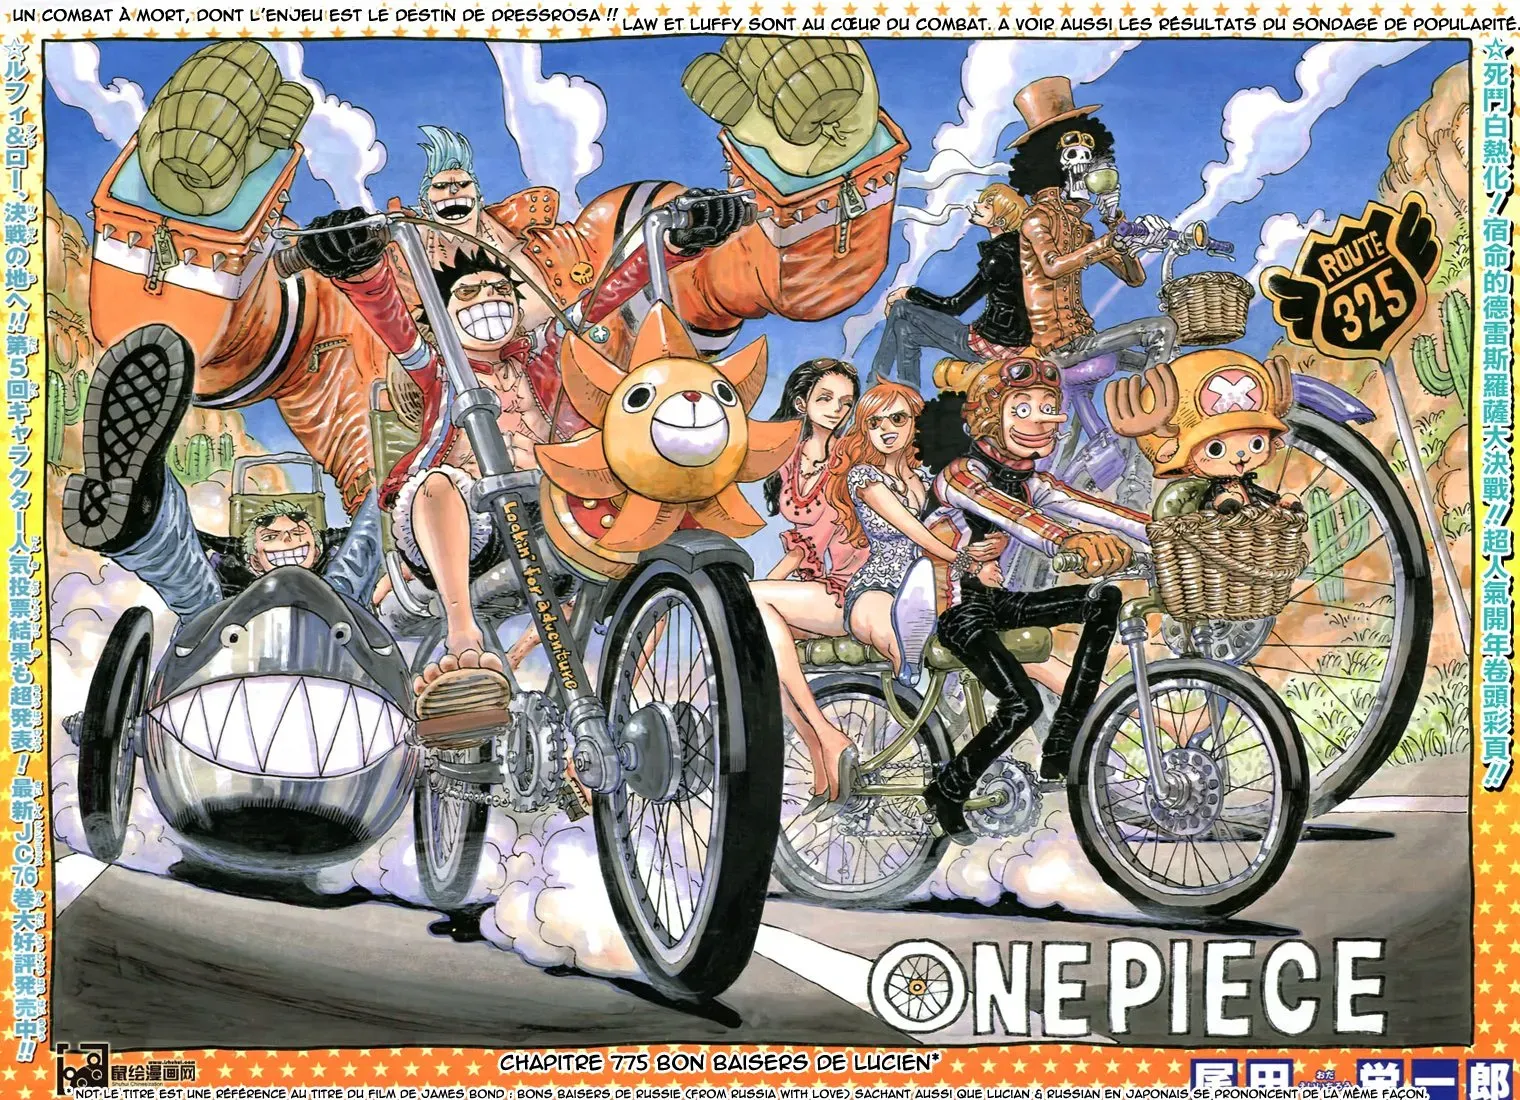 One Piece: Chapter chapitre-775 - Page 1